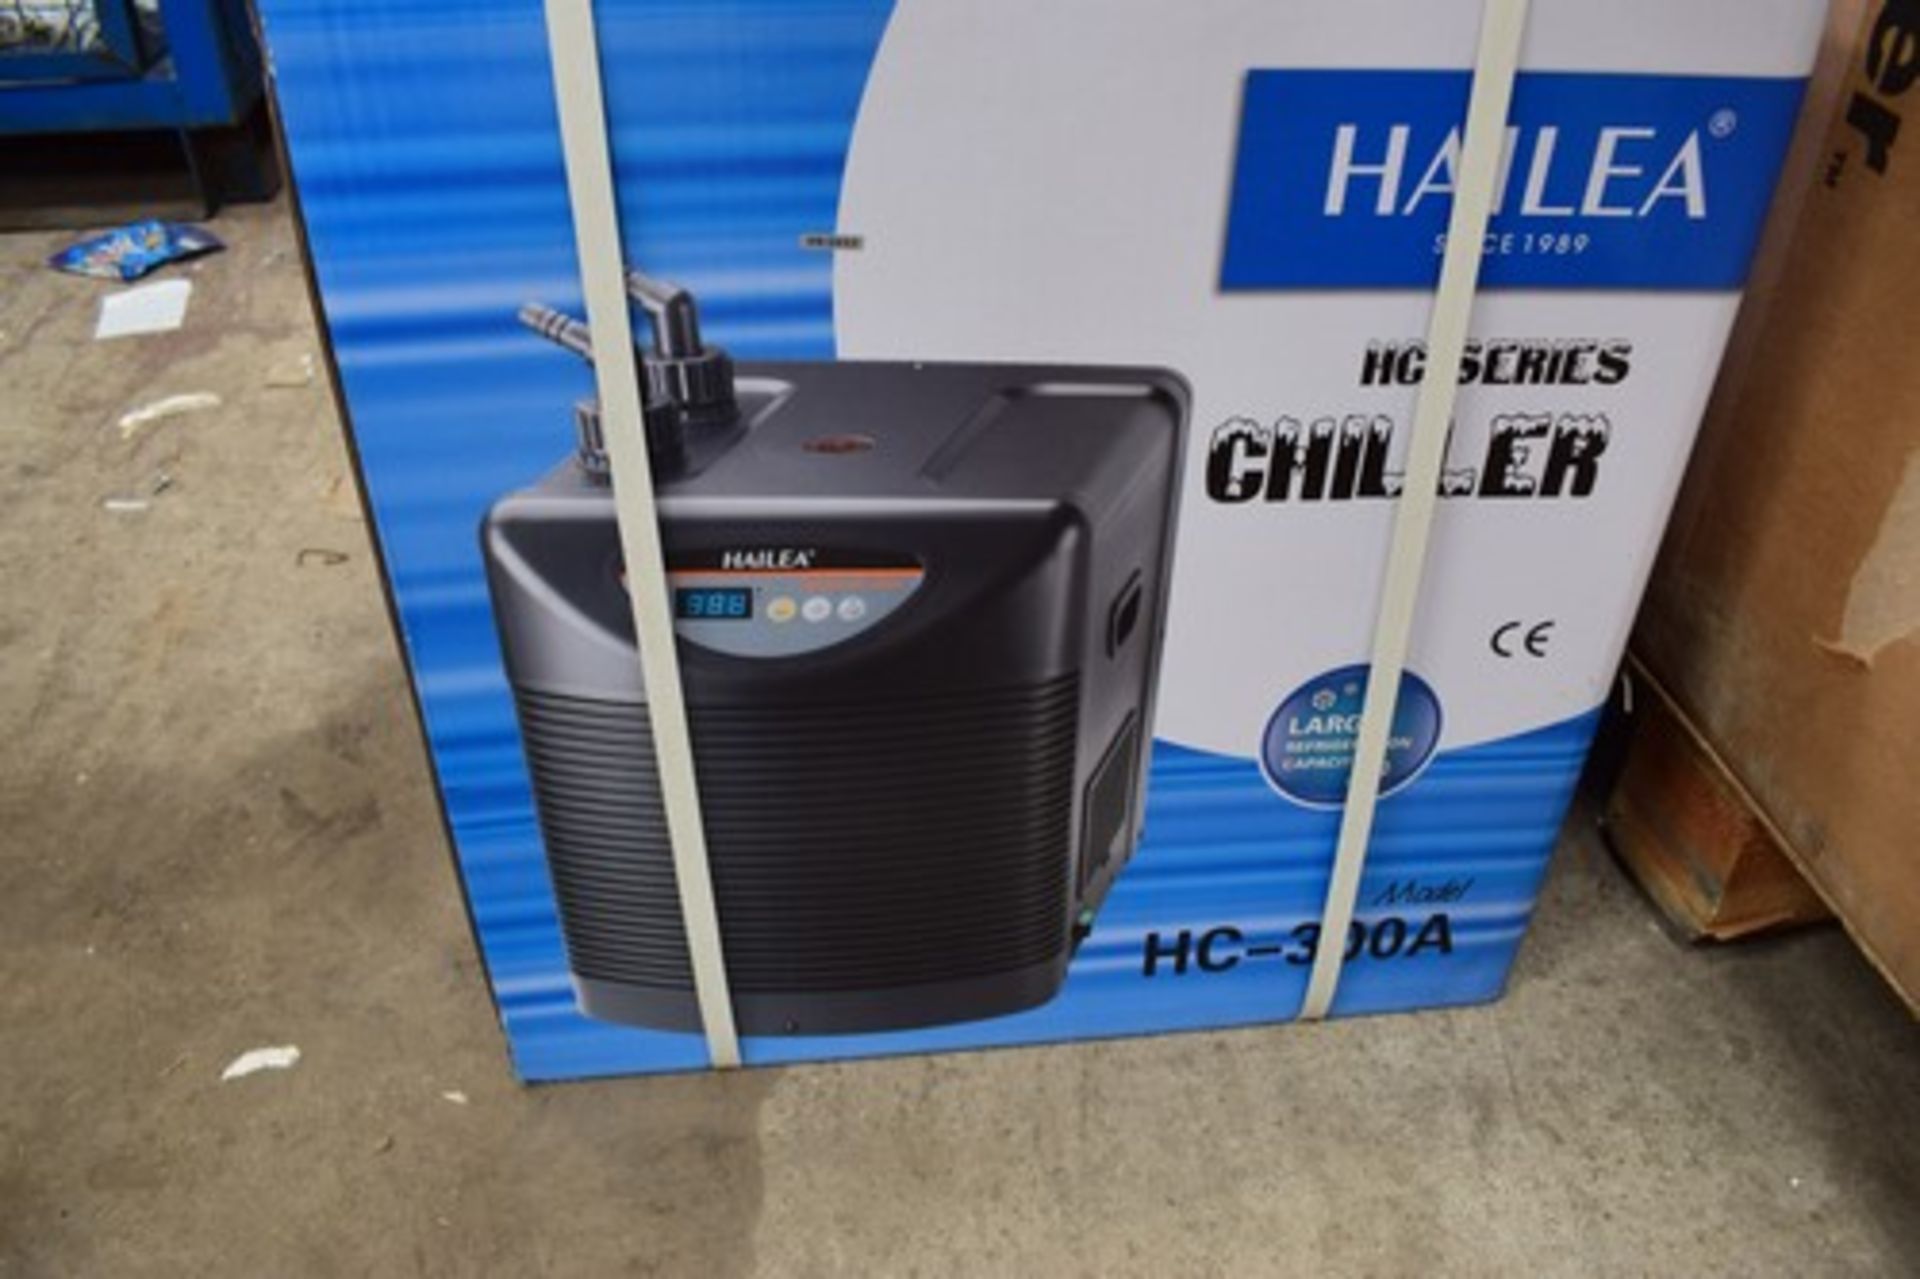 1 x Hailea ice series chiller, Model HC-300A - Sealed new in box (D6) - Image 2 of 2